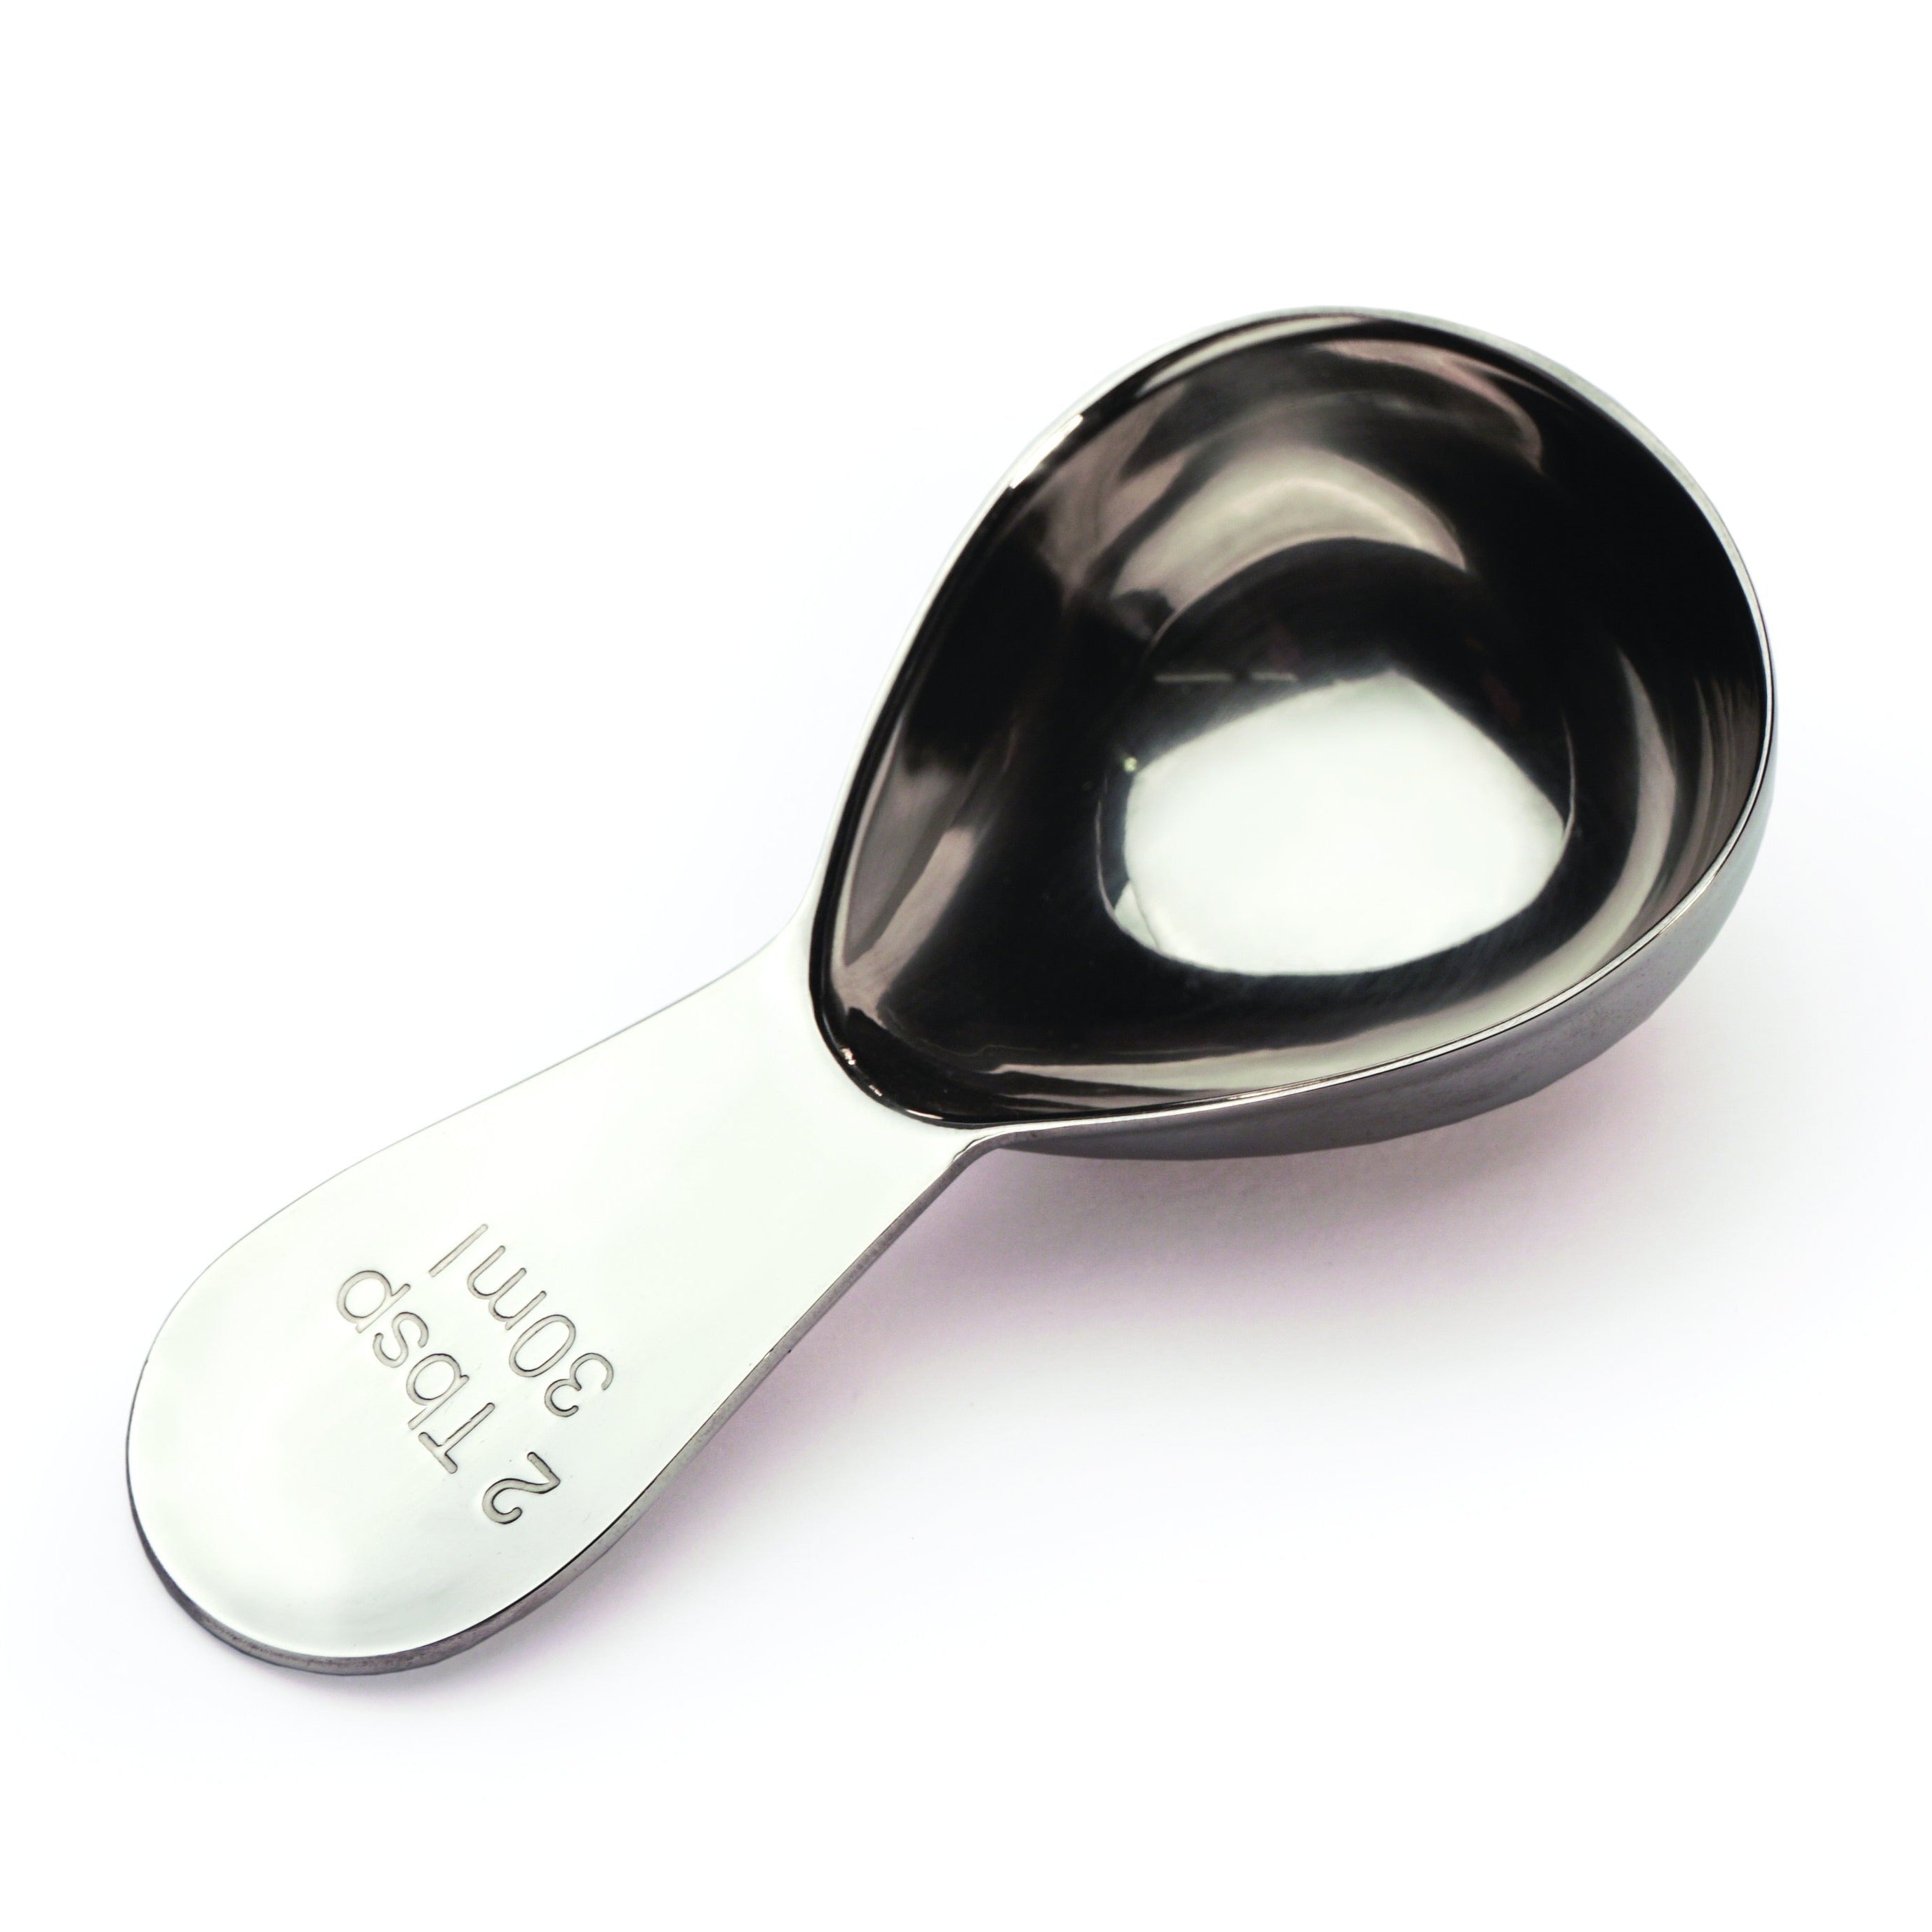 R.S.V.P. Short Coffee Scoop – The Happy Cook